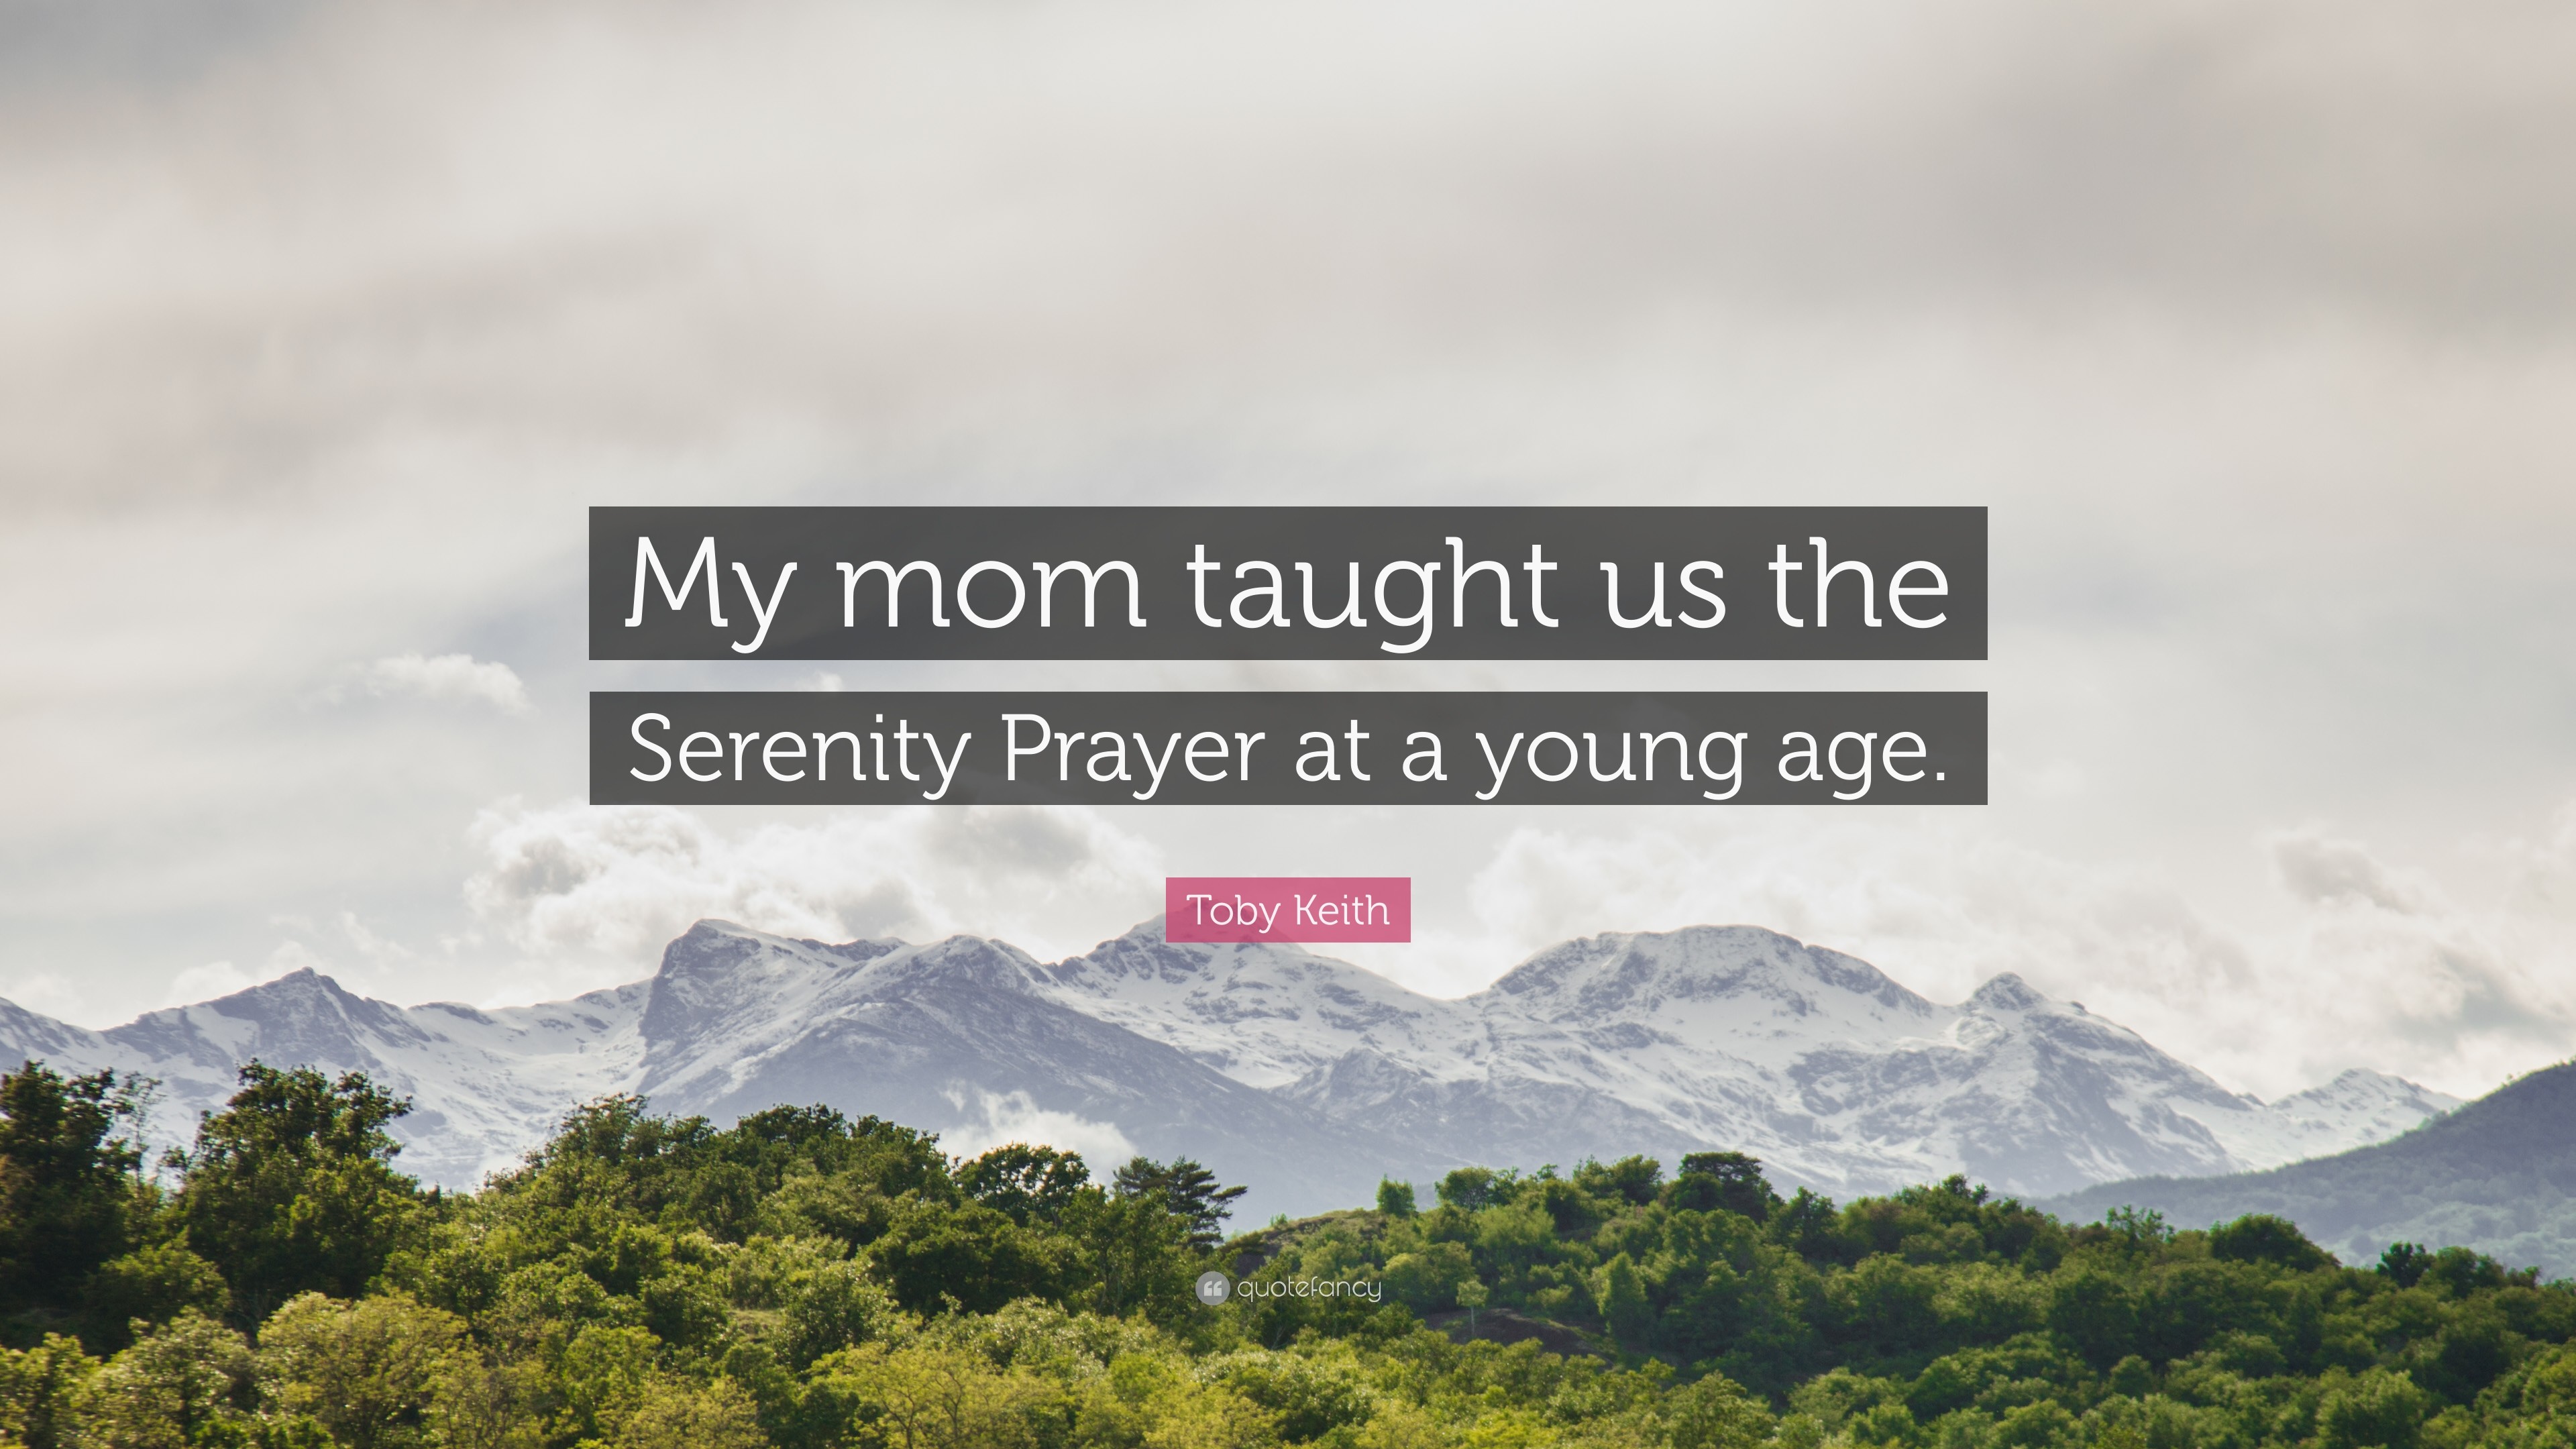 3840x2160 Toby Keith Quote: “My mom taught us the Serenity Prayer at a young age